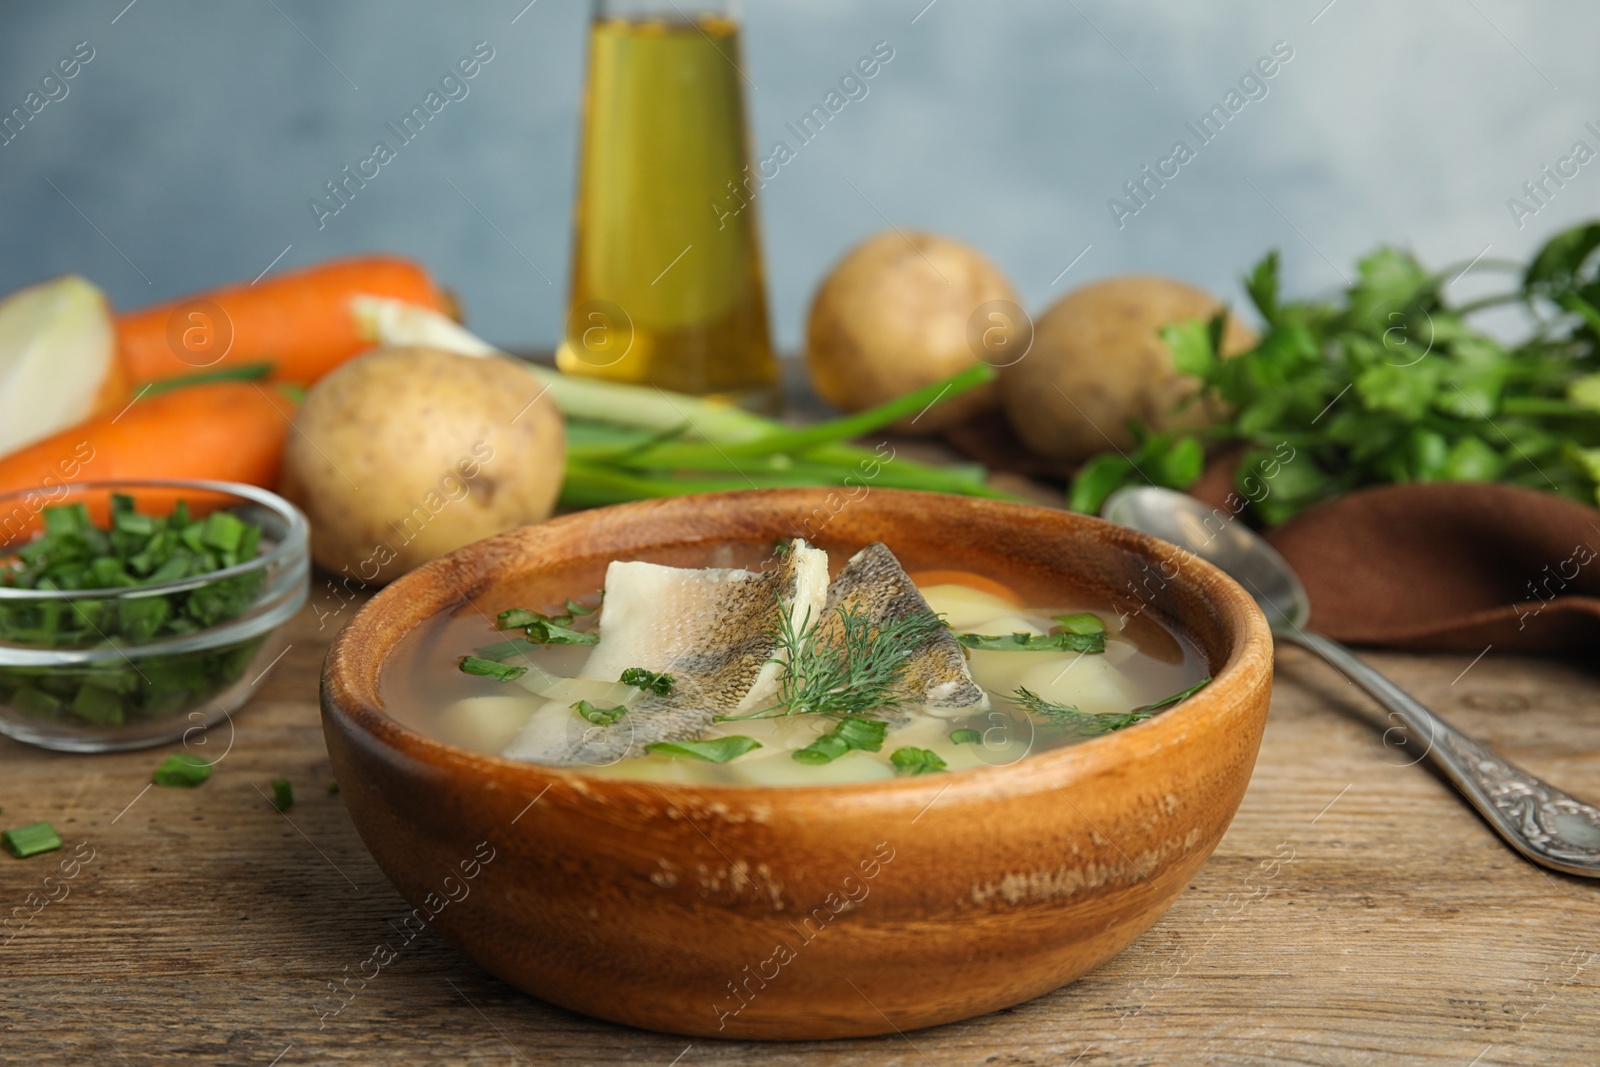 Photo of Delicious fish soup in bowl on wooden table